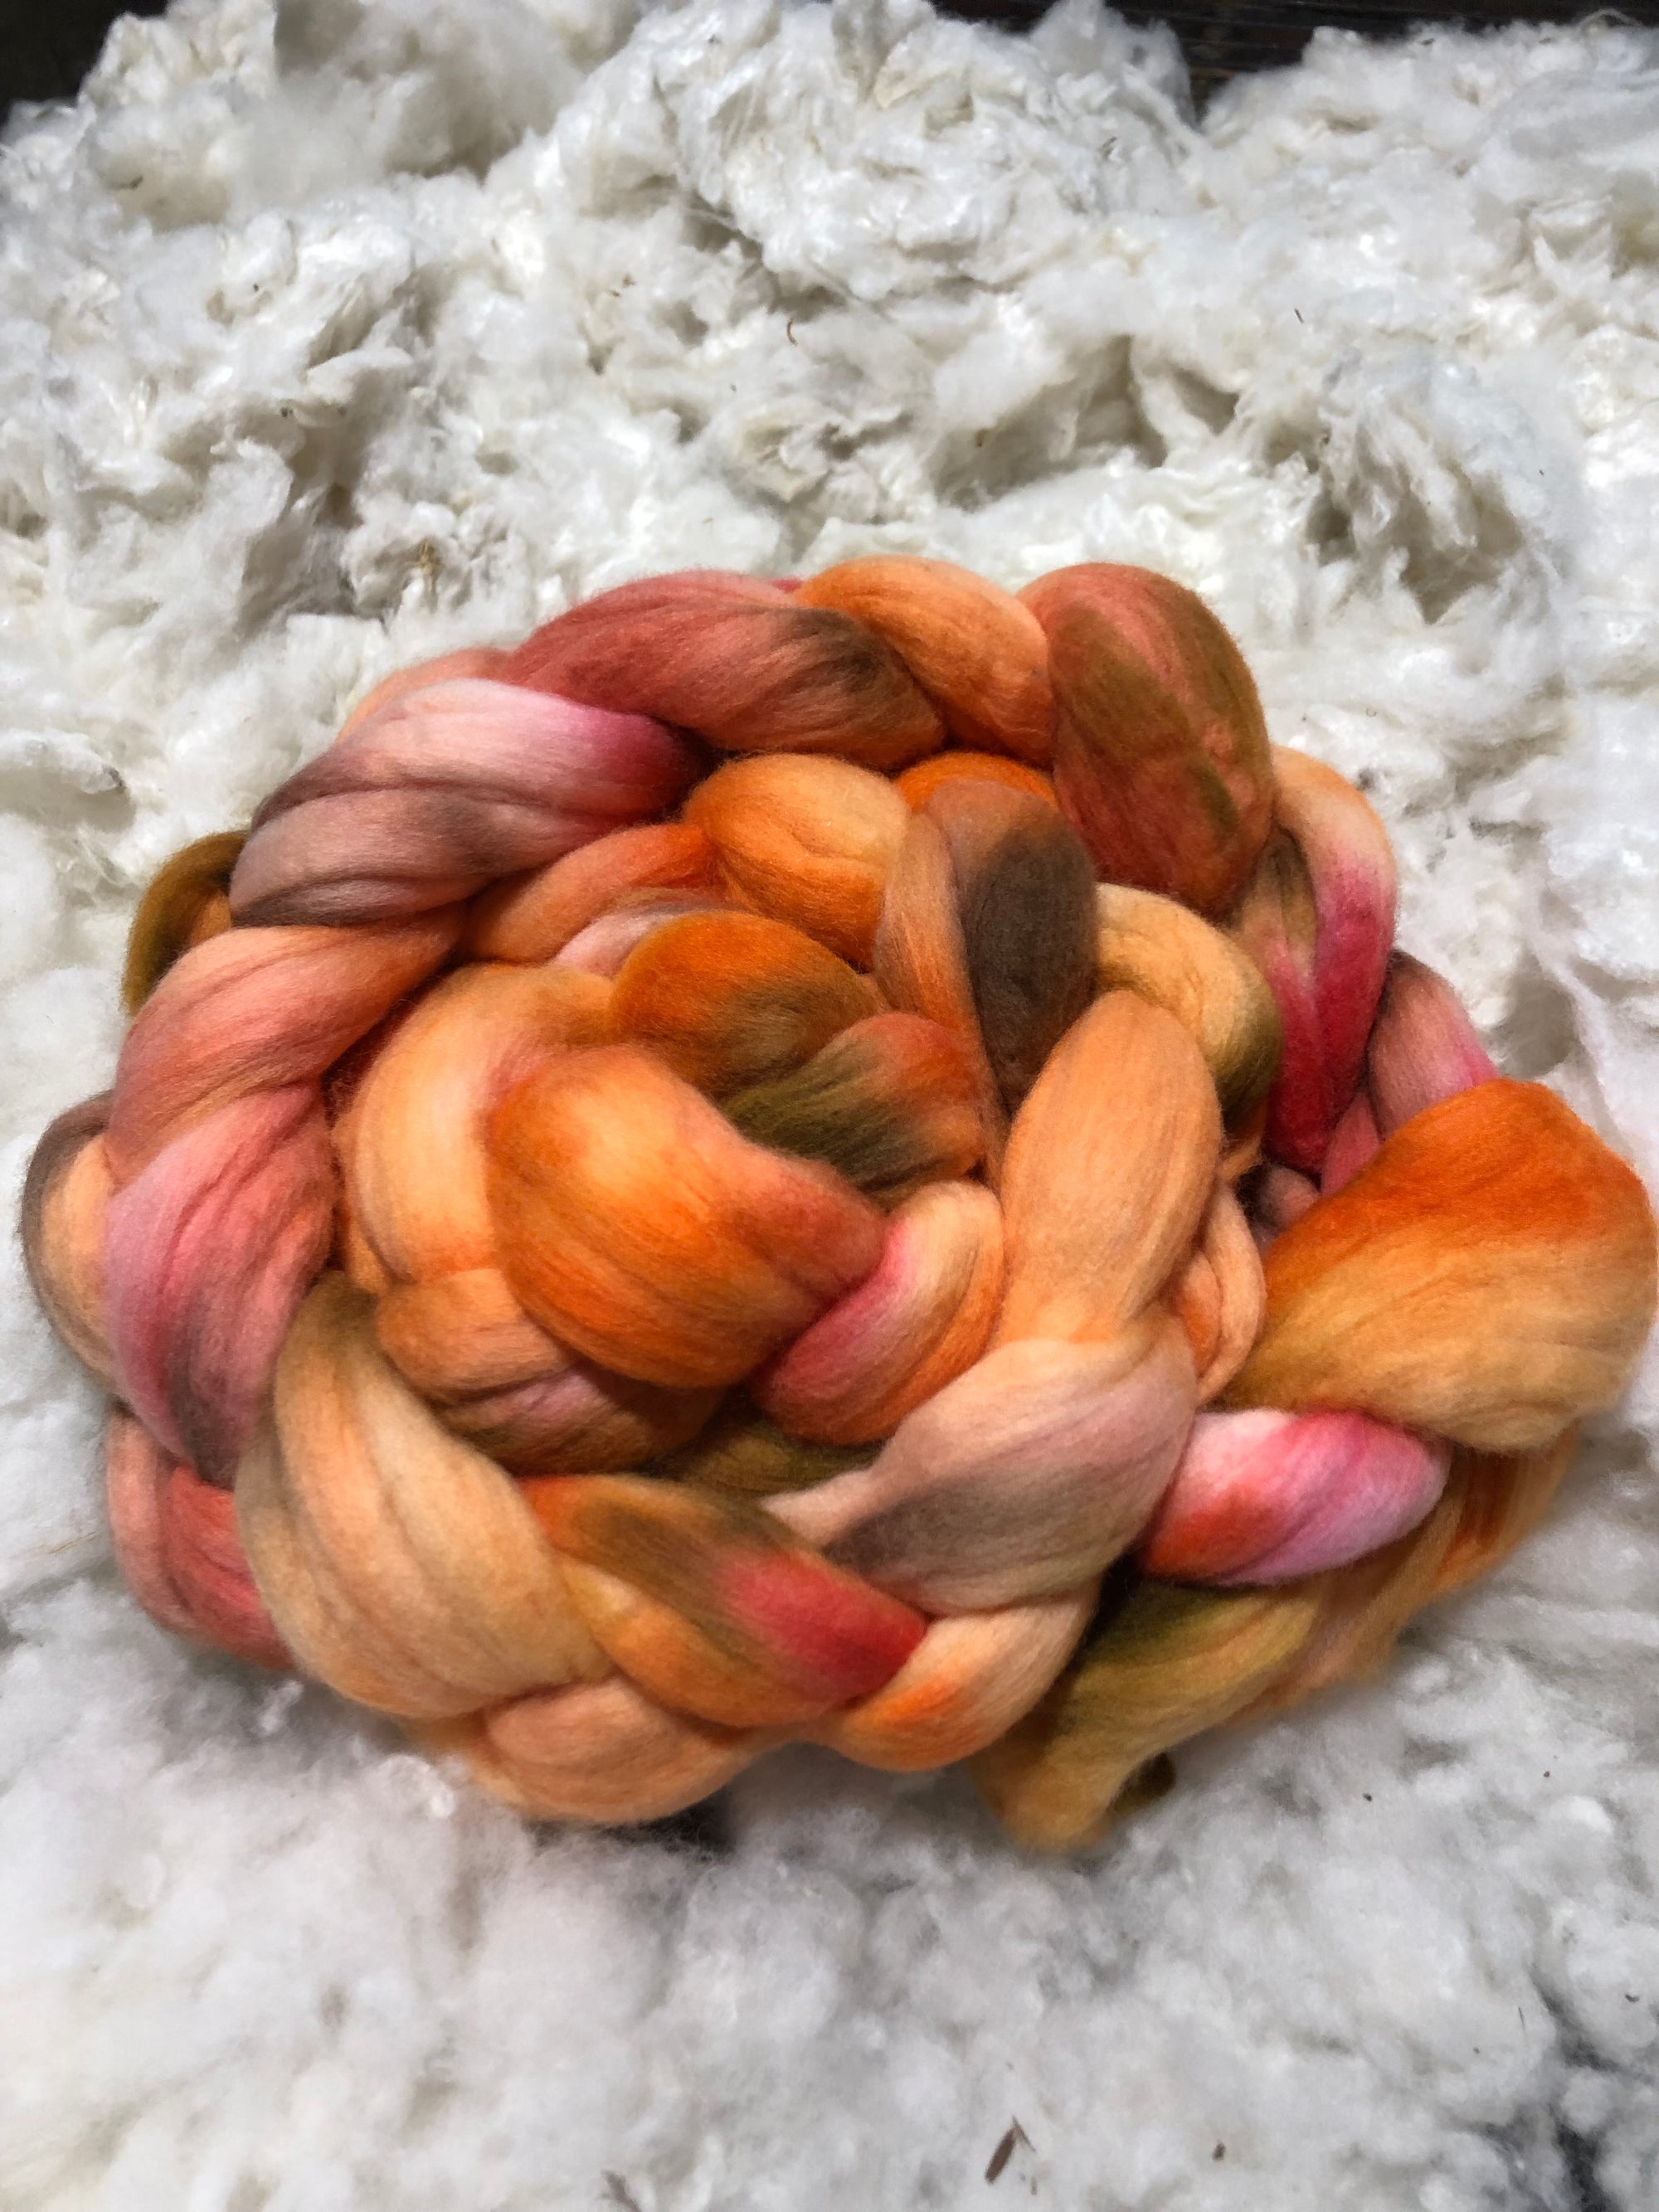 Hand Dyed Wool Top / Sliver / Roving - 200grams